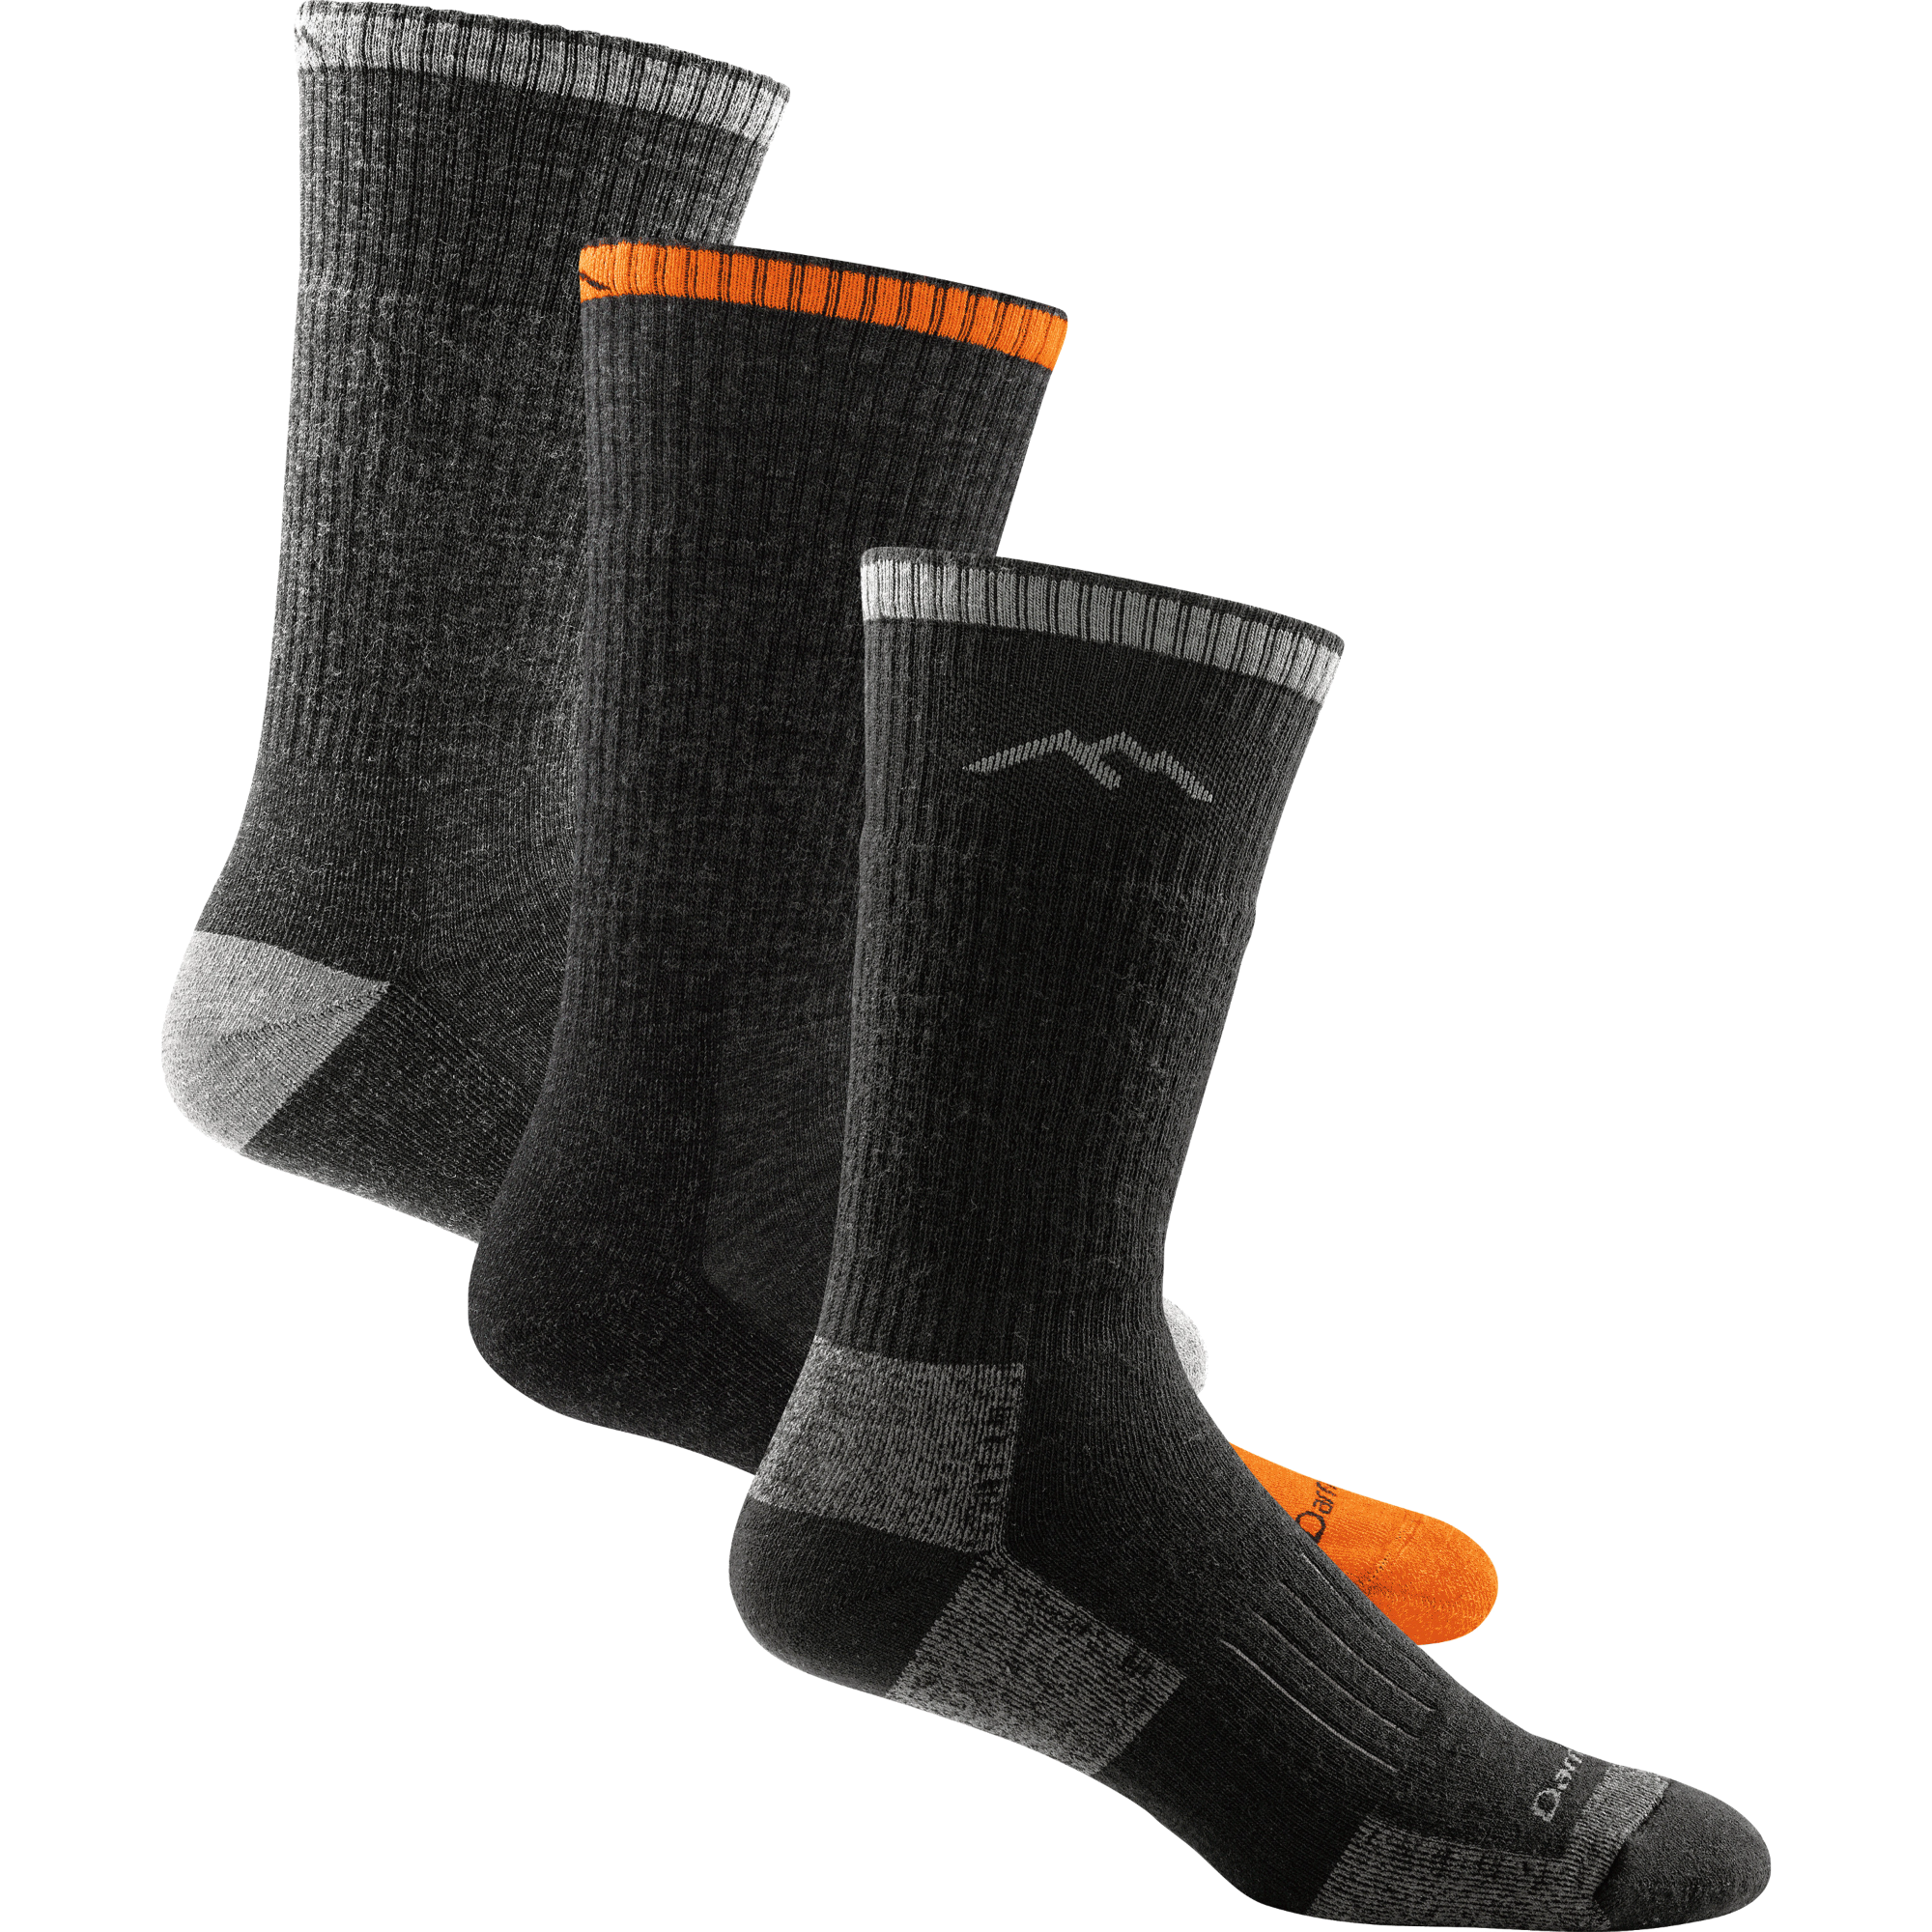 3 pack bundle shot of the men's john henry work sock in gravel, the men's steely boot work sock in graphite, and the unisex hunting boot sock in charcoal 